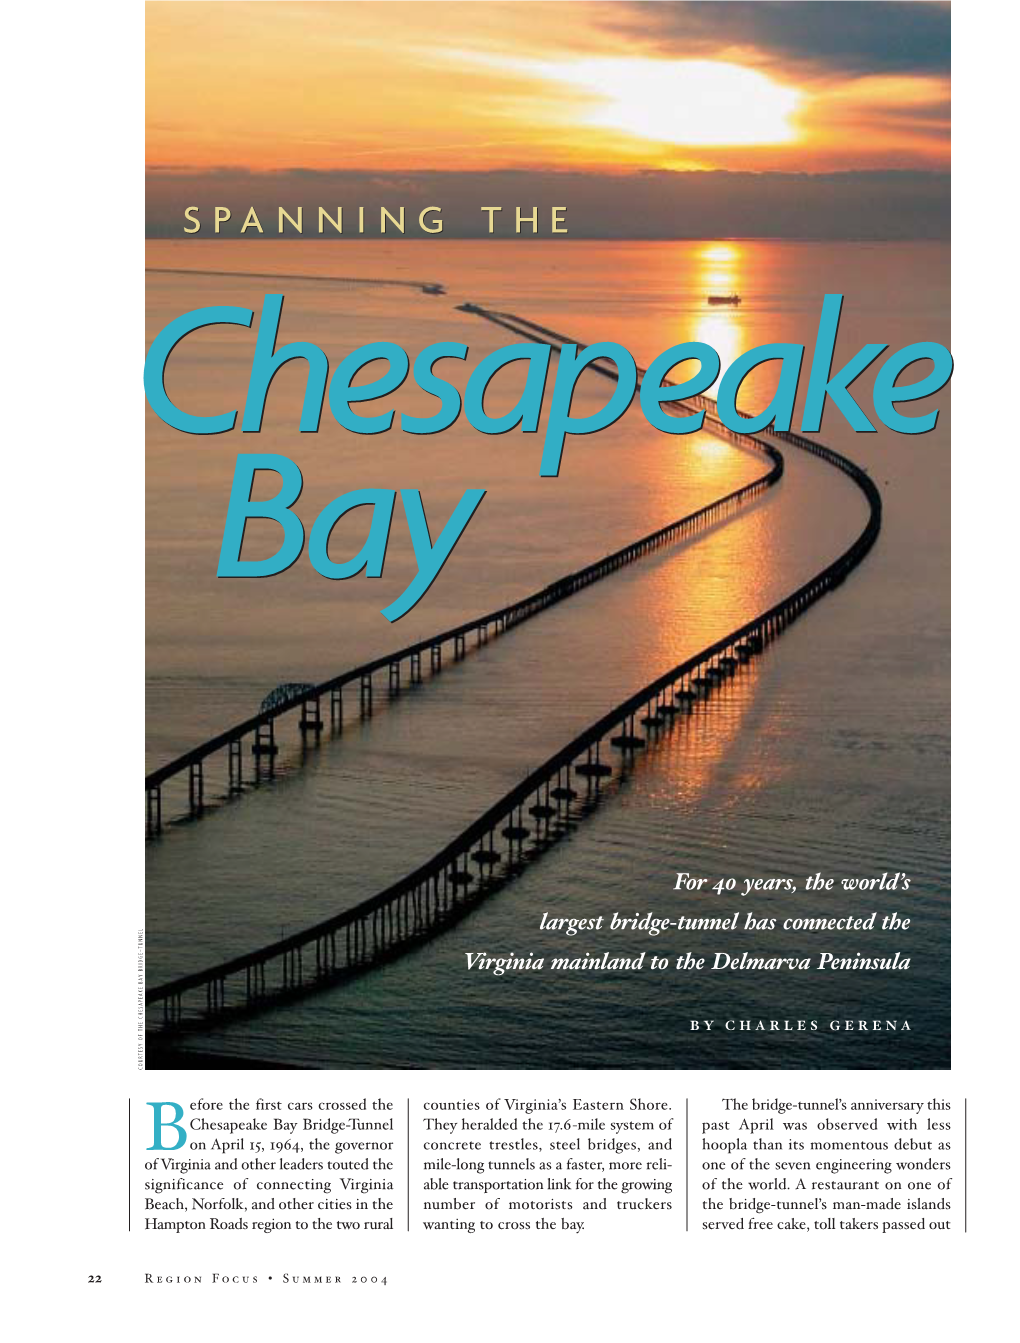 Spanning the Chesapeake Bay: for 40 Years the World's Largest Bridge